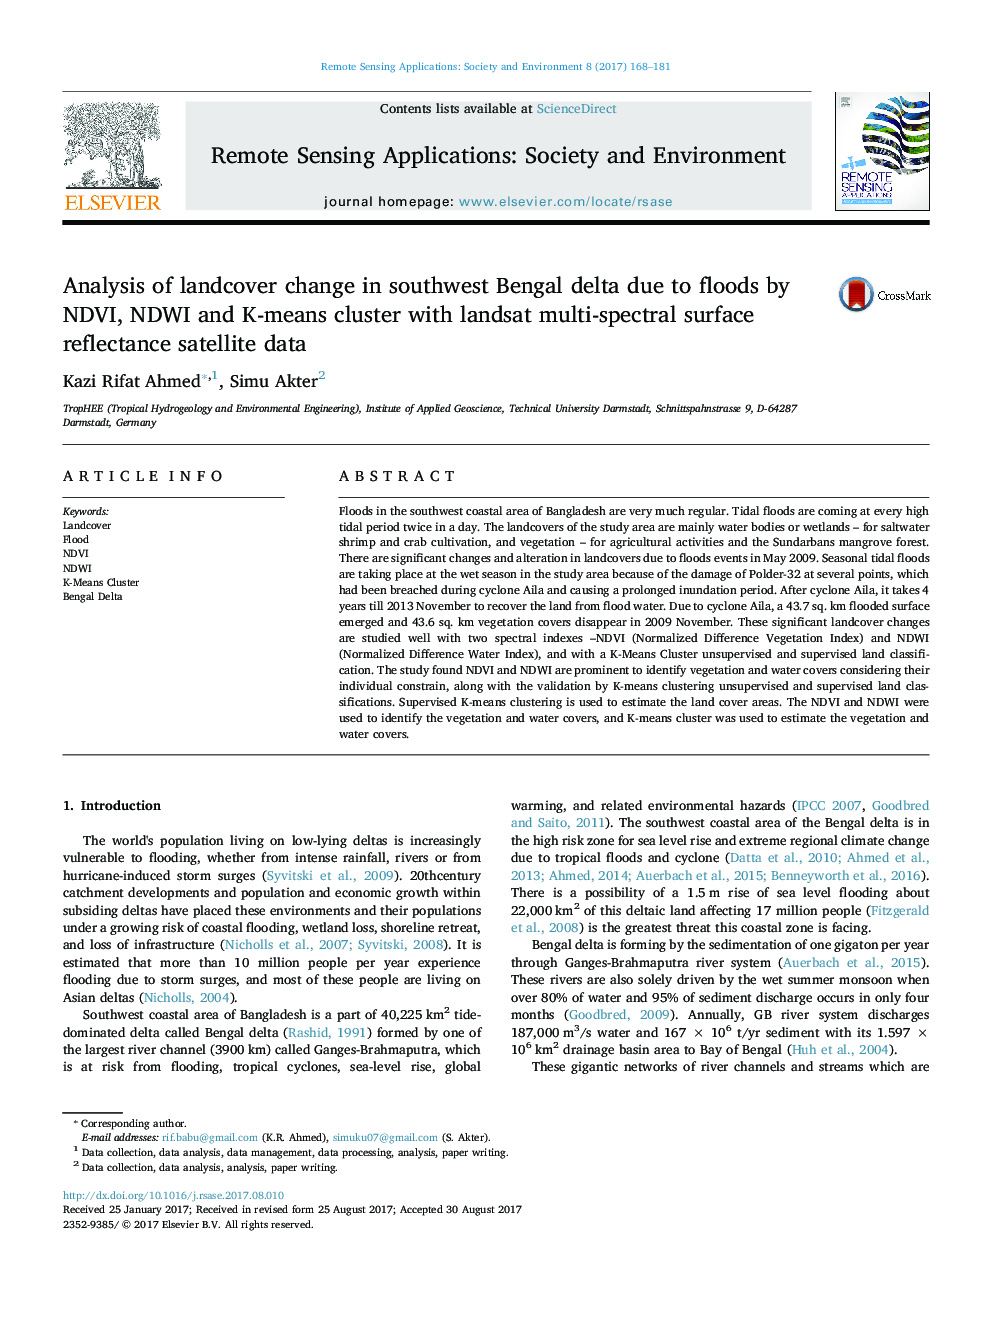 Analysis of landcover change in southwest Bengal delta due to floods by NDVI, NDWI and K-means cluster with landsat multi-spectral surface reflectance satellite data